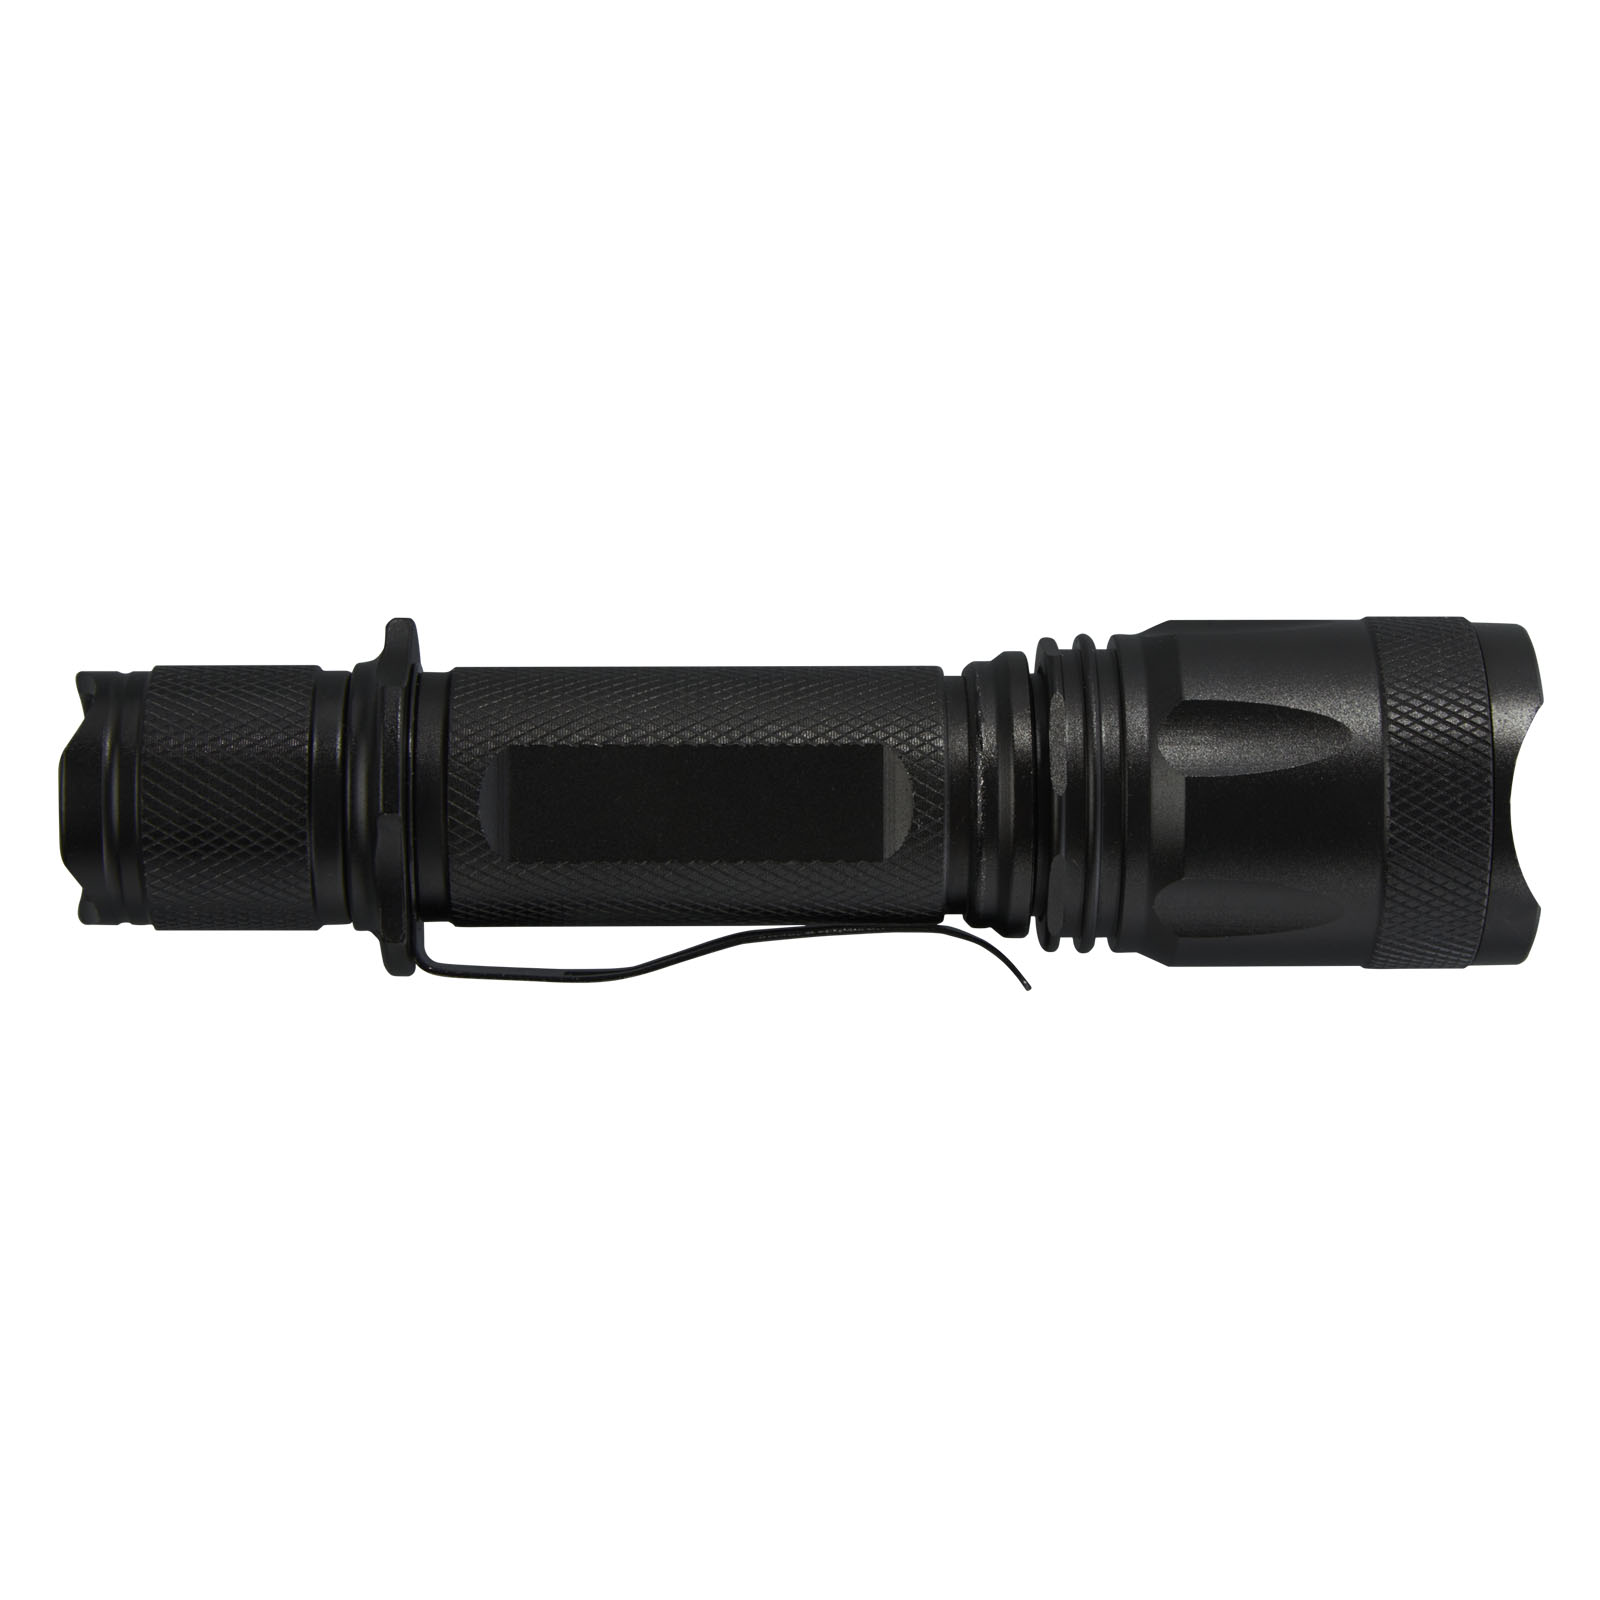 Advertising Lamps - Mears 5W rechargeable tactical flashlight - 2